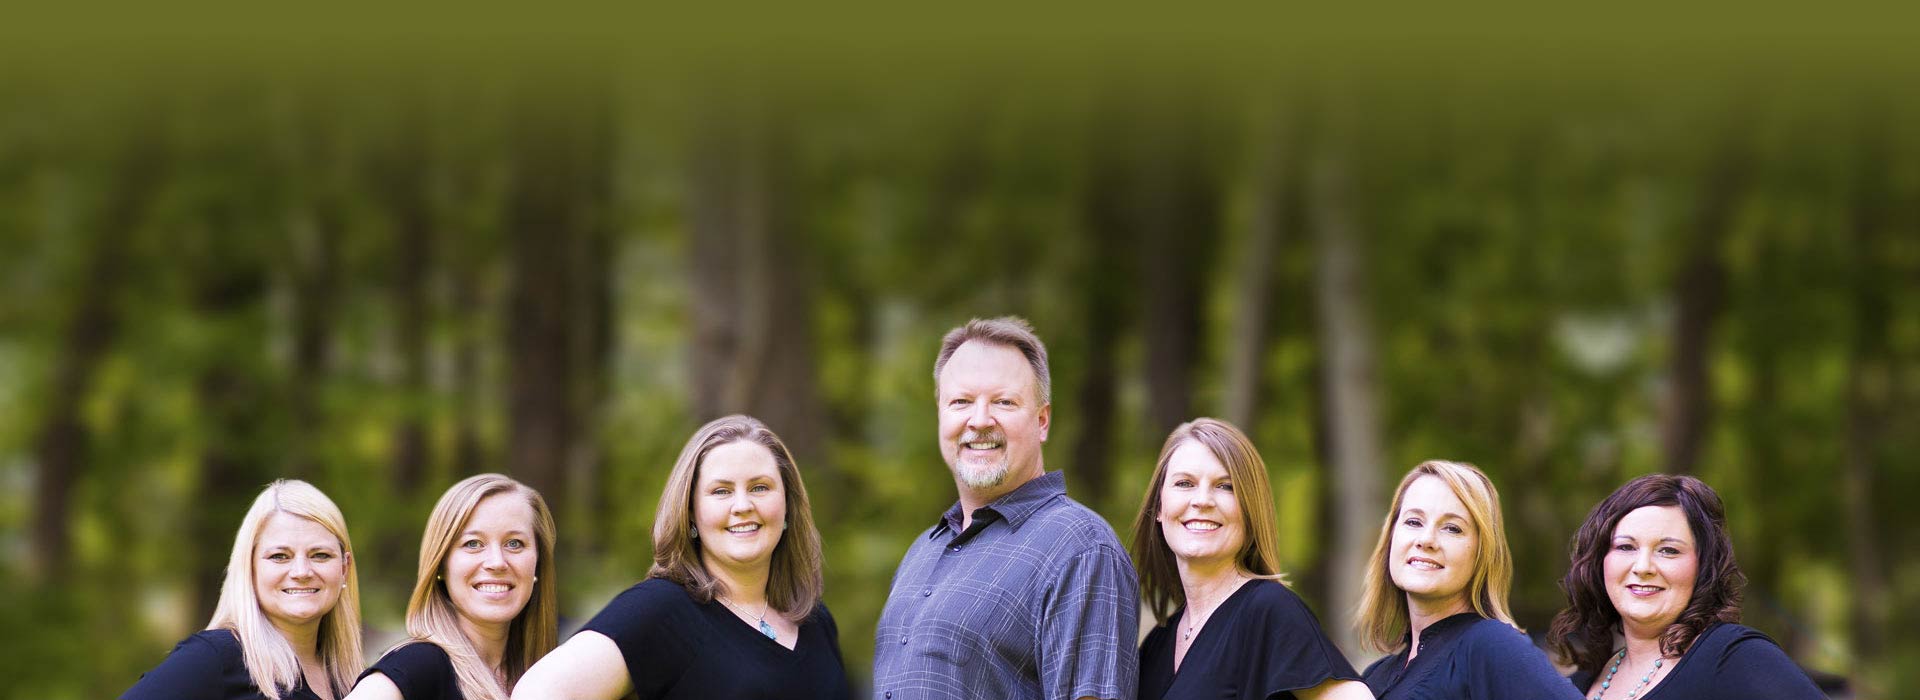 Dr. Robert M. Young and dental team